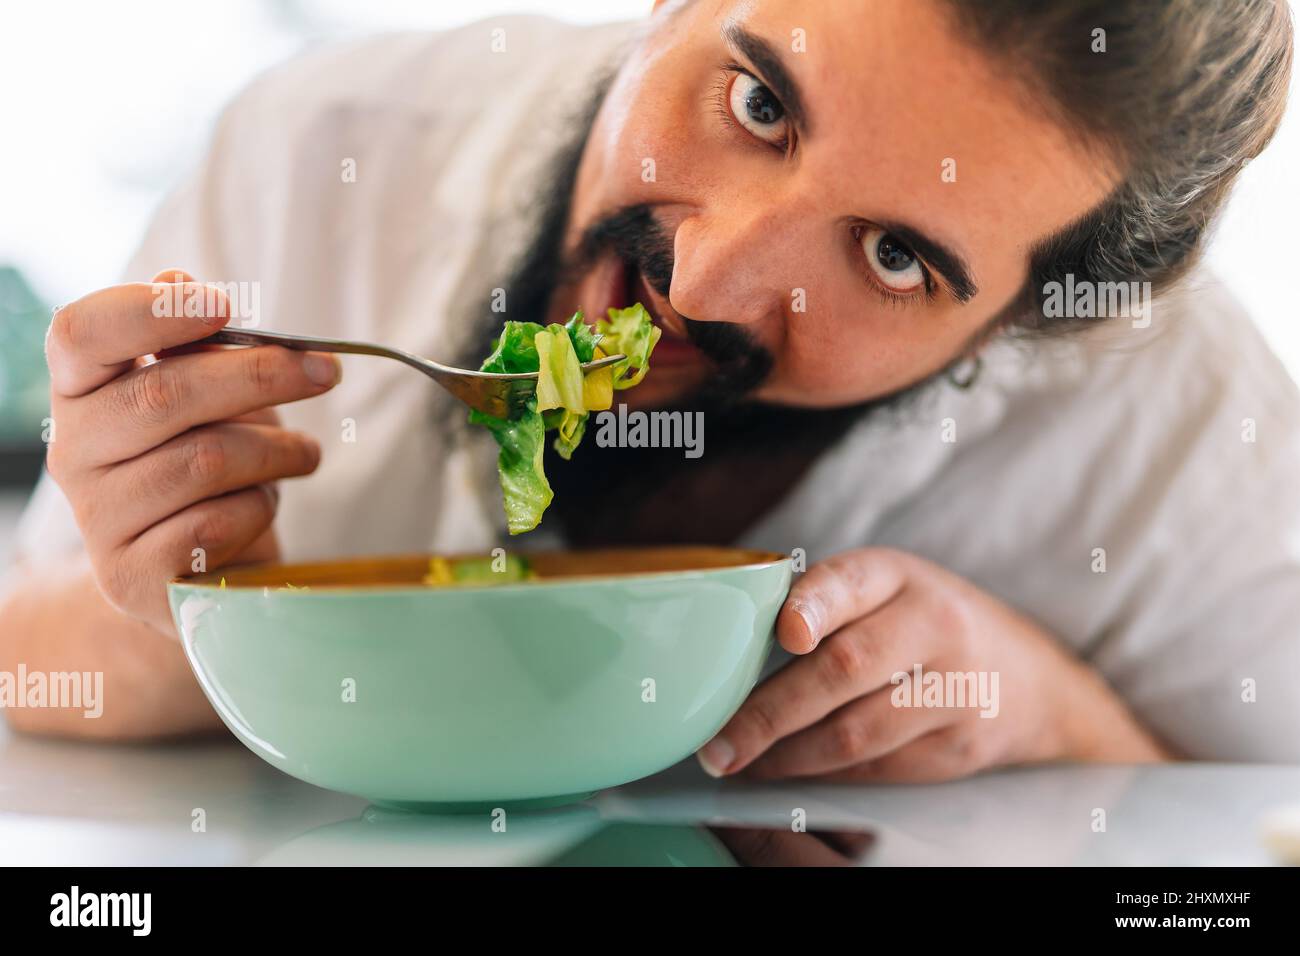 Close-up of a bearded young man eating a salad Stock Photo